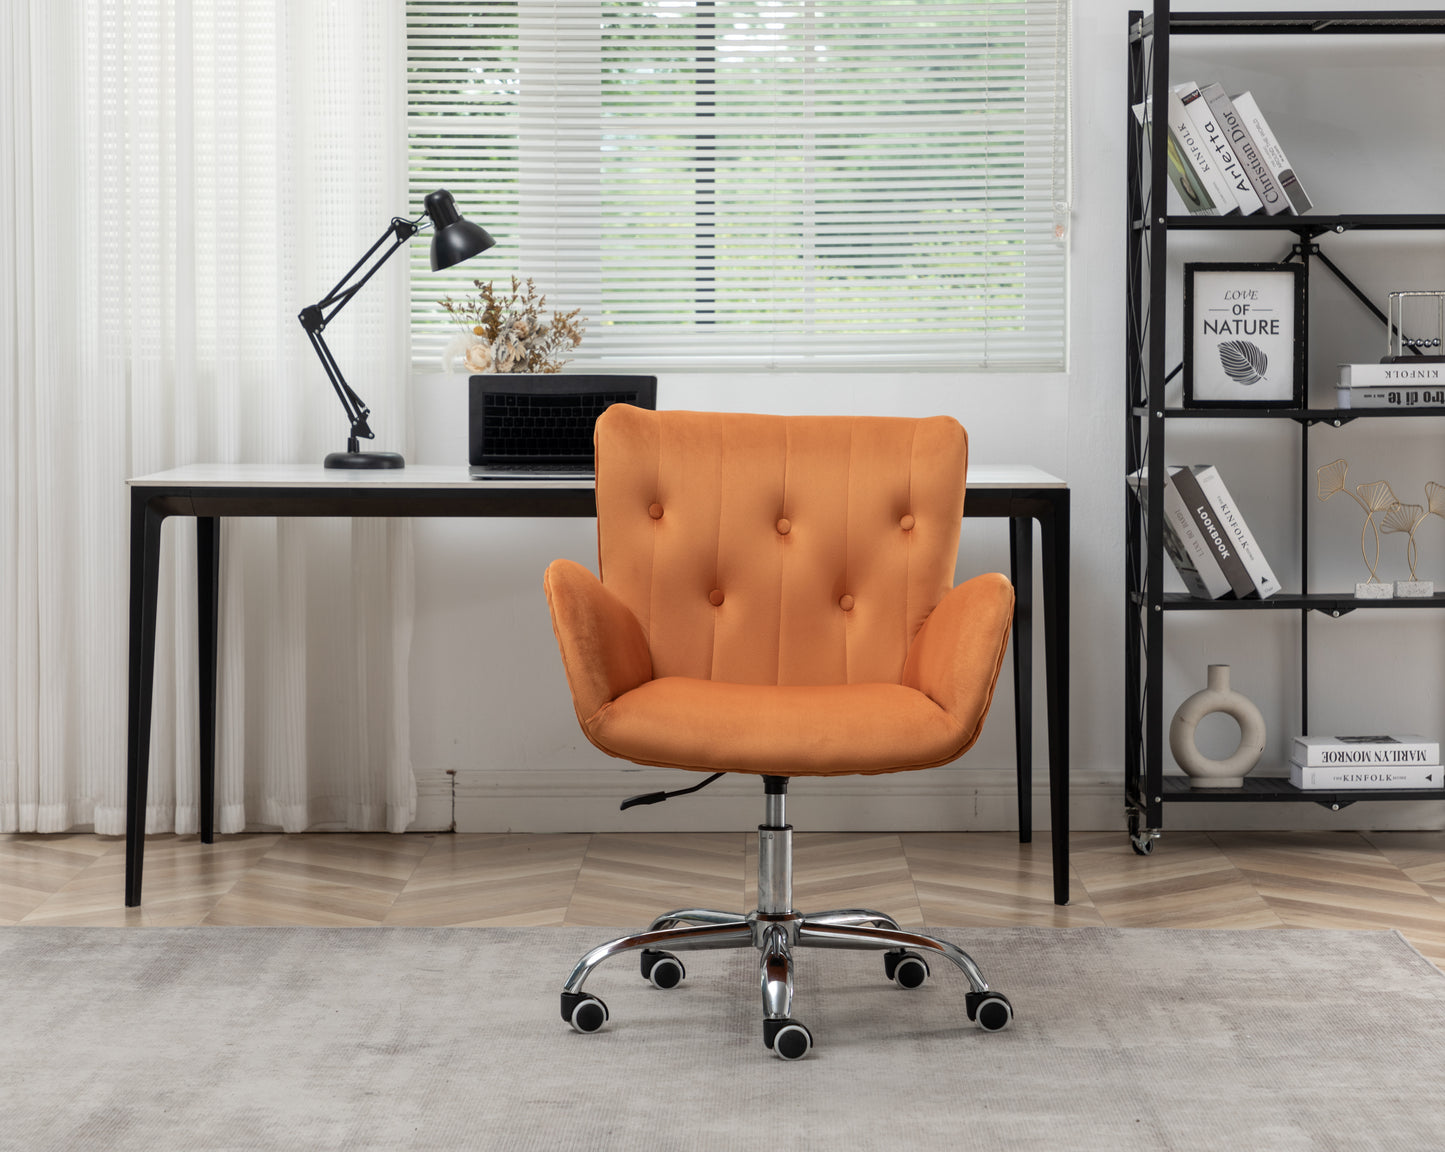 velvet office chair, modern velvet tufted home office chair with wheels, adjustable height swivel, comfortable armchair,button tufted chair,Suitable for study, bedroom, living room, Orange